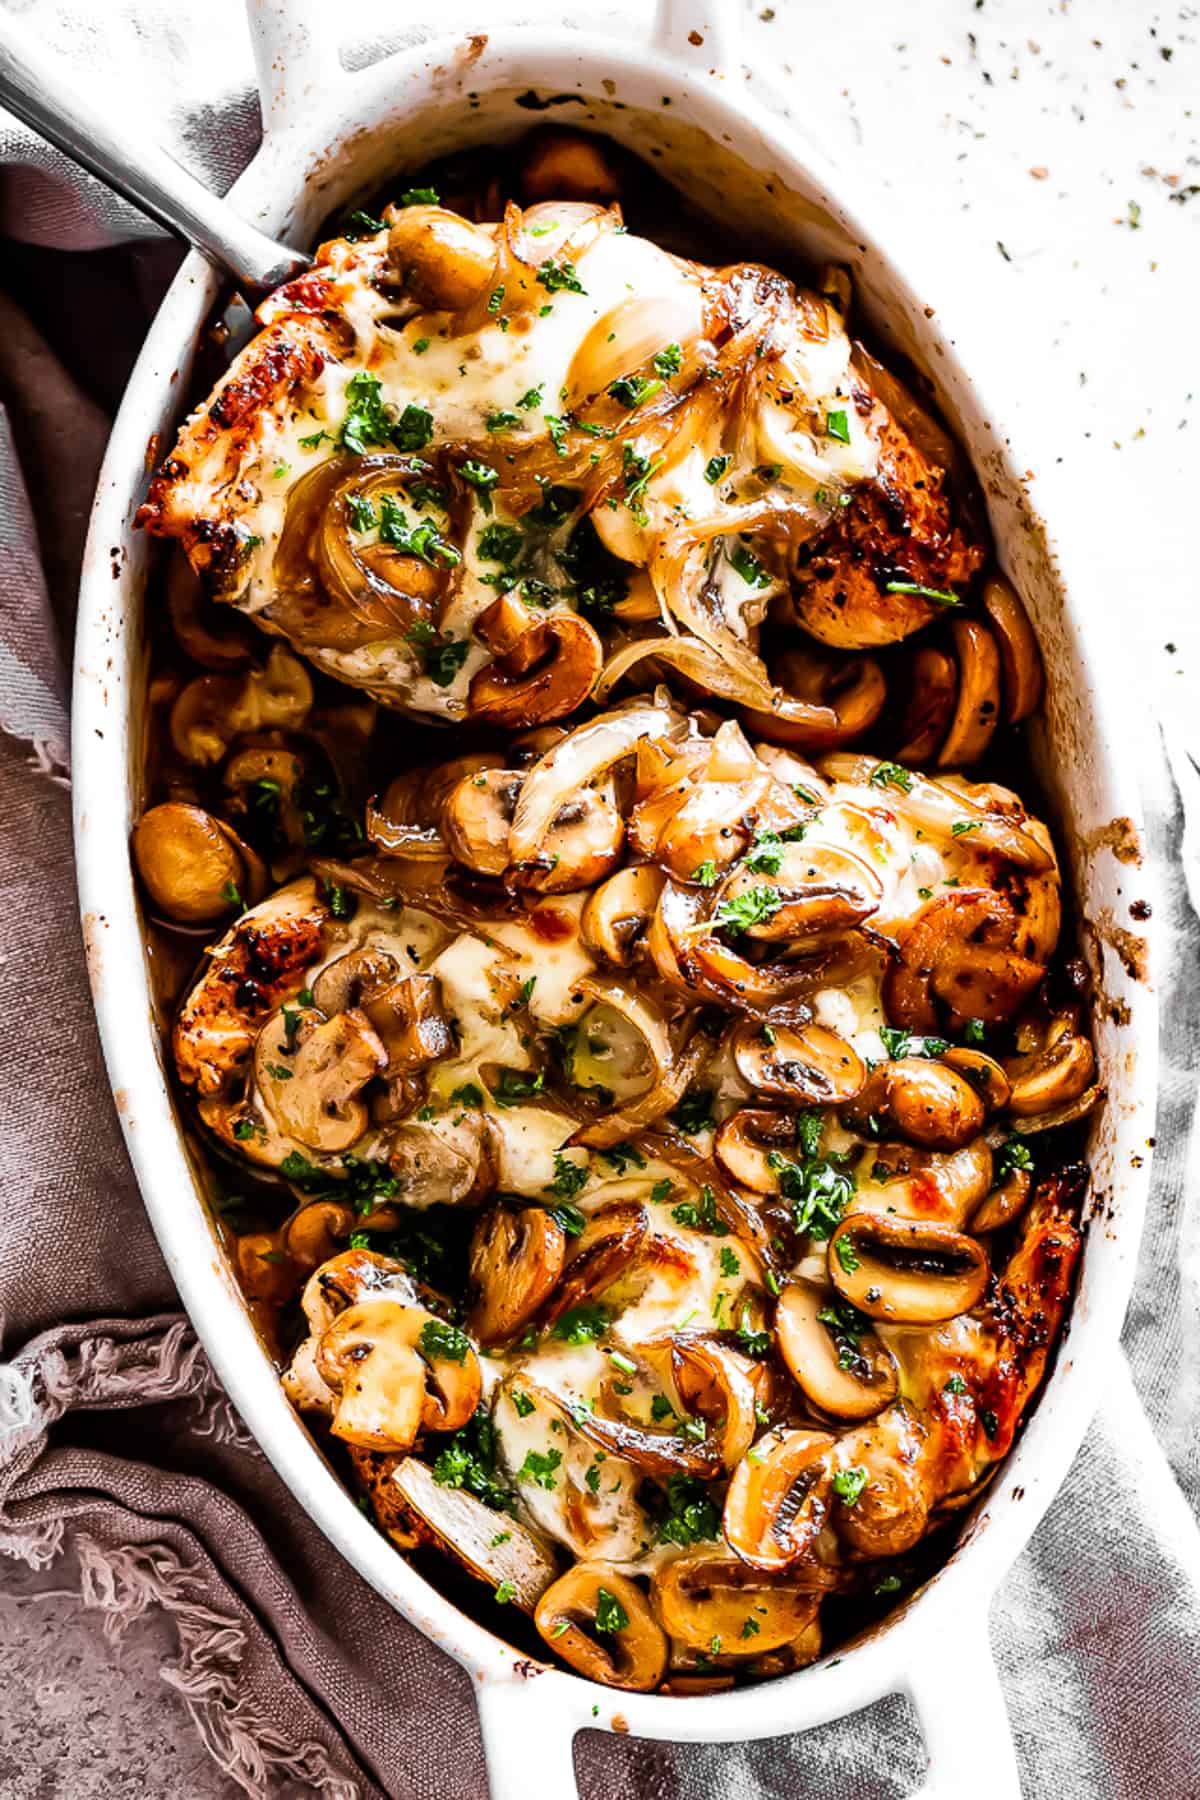 Cheesy Baked Chicken Breasts with Mushrooms